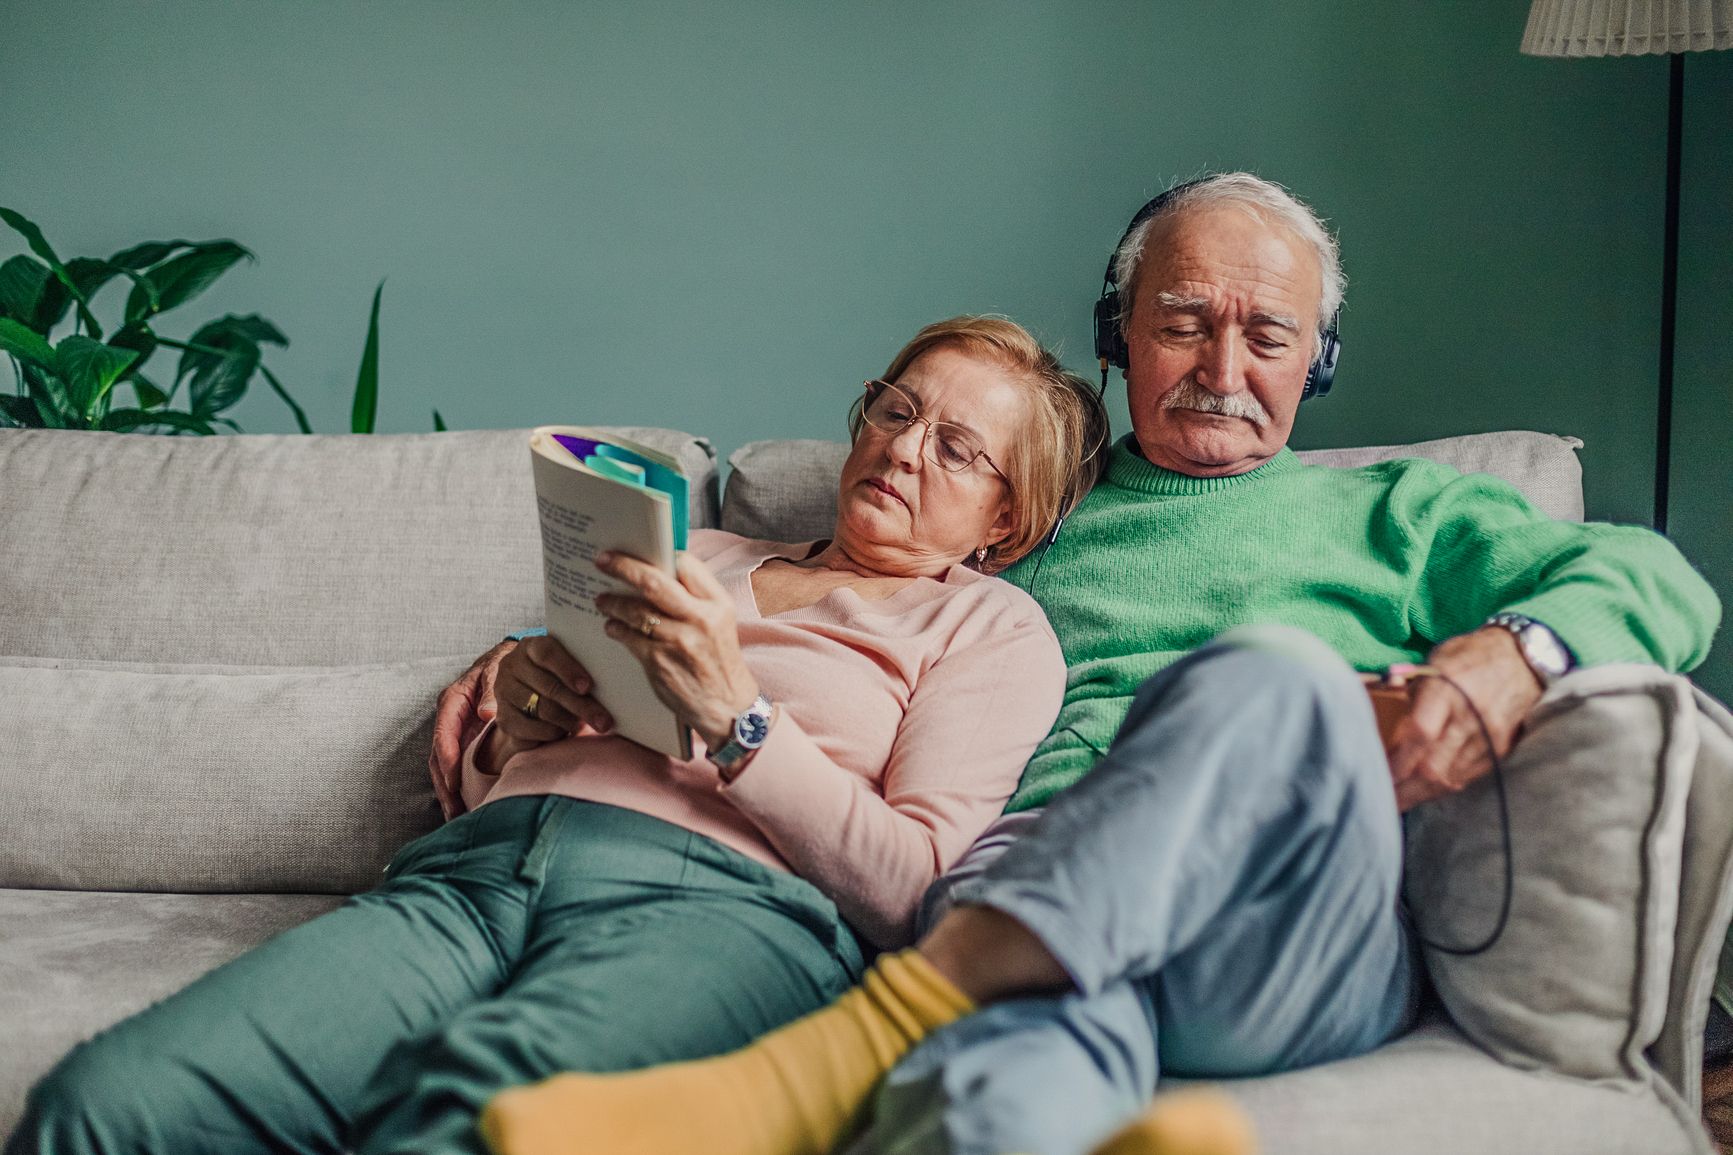 Older couple relaxing together on the couch. Woman is reading and comfortably leaning against the man who is listening to headphones with him arm around her..